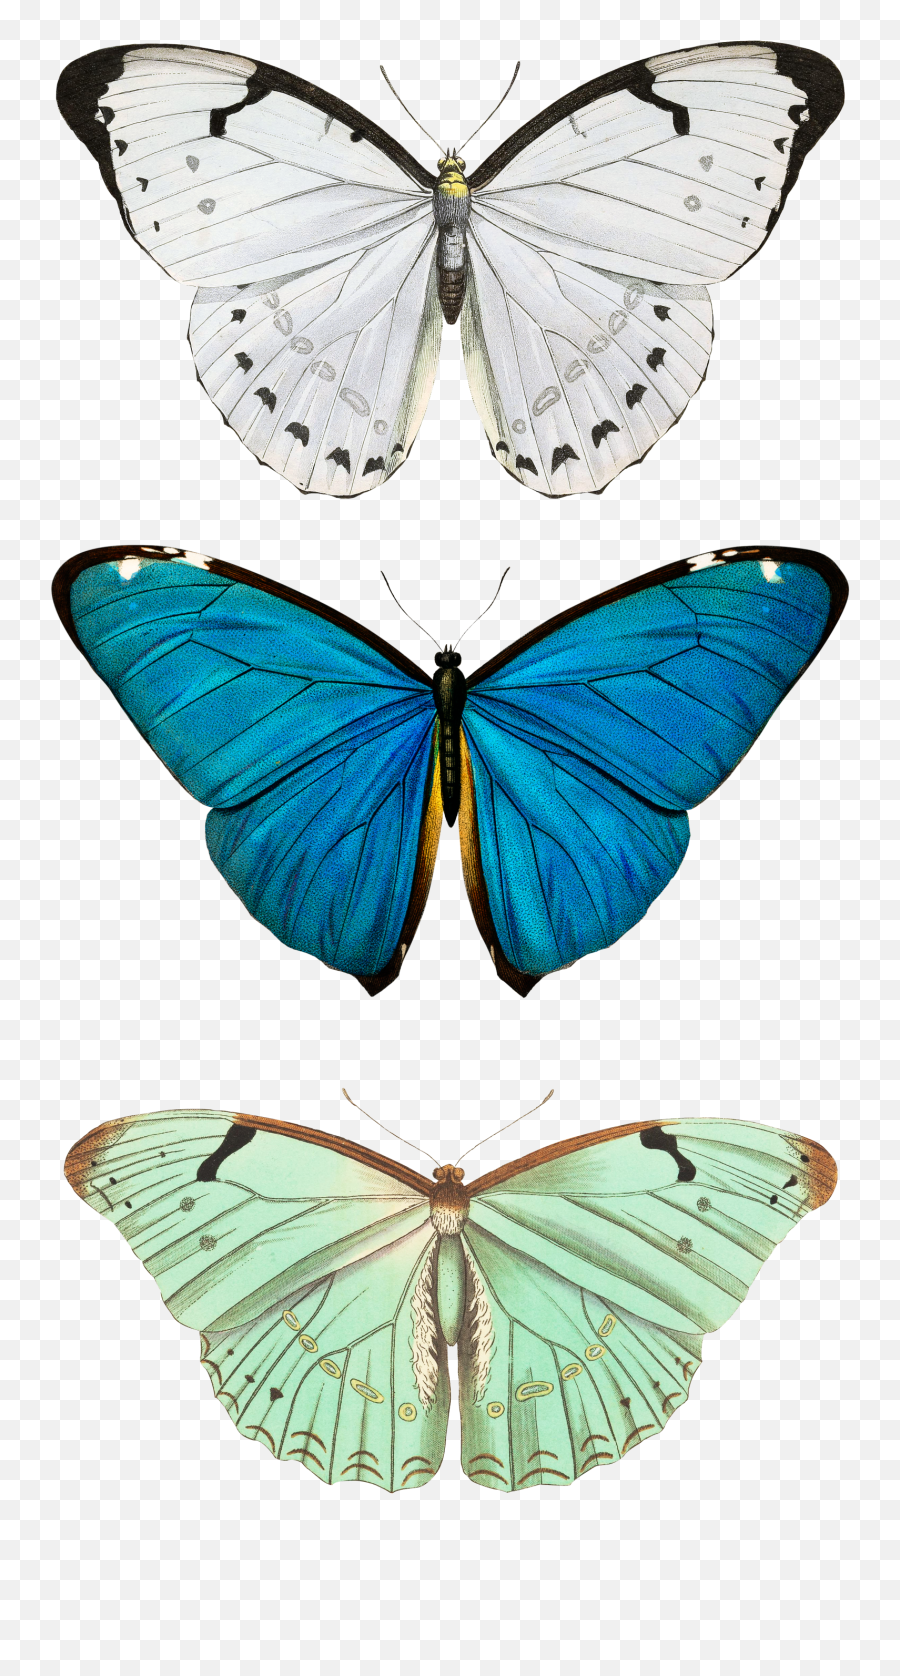 Transparent Butterfly Wallpapers - Butterfly Iphone Background Emoji,Transparent Wallpaper Iphone